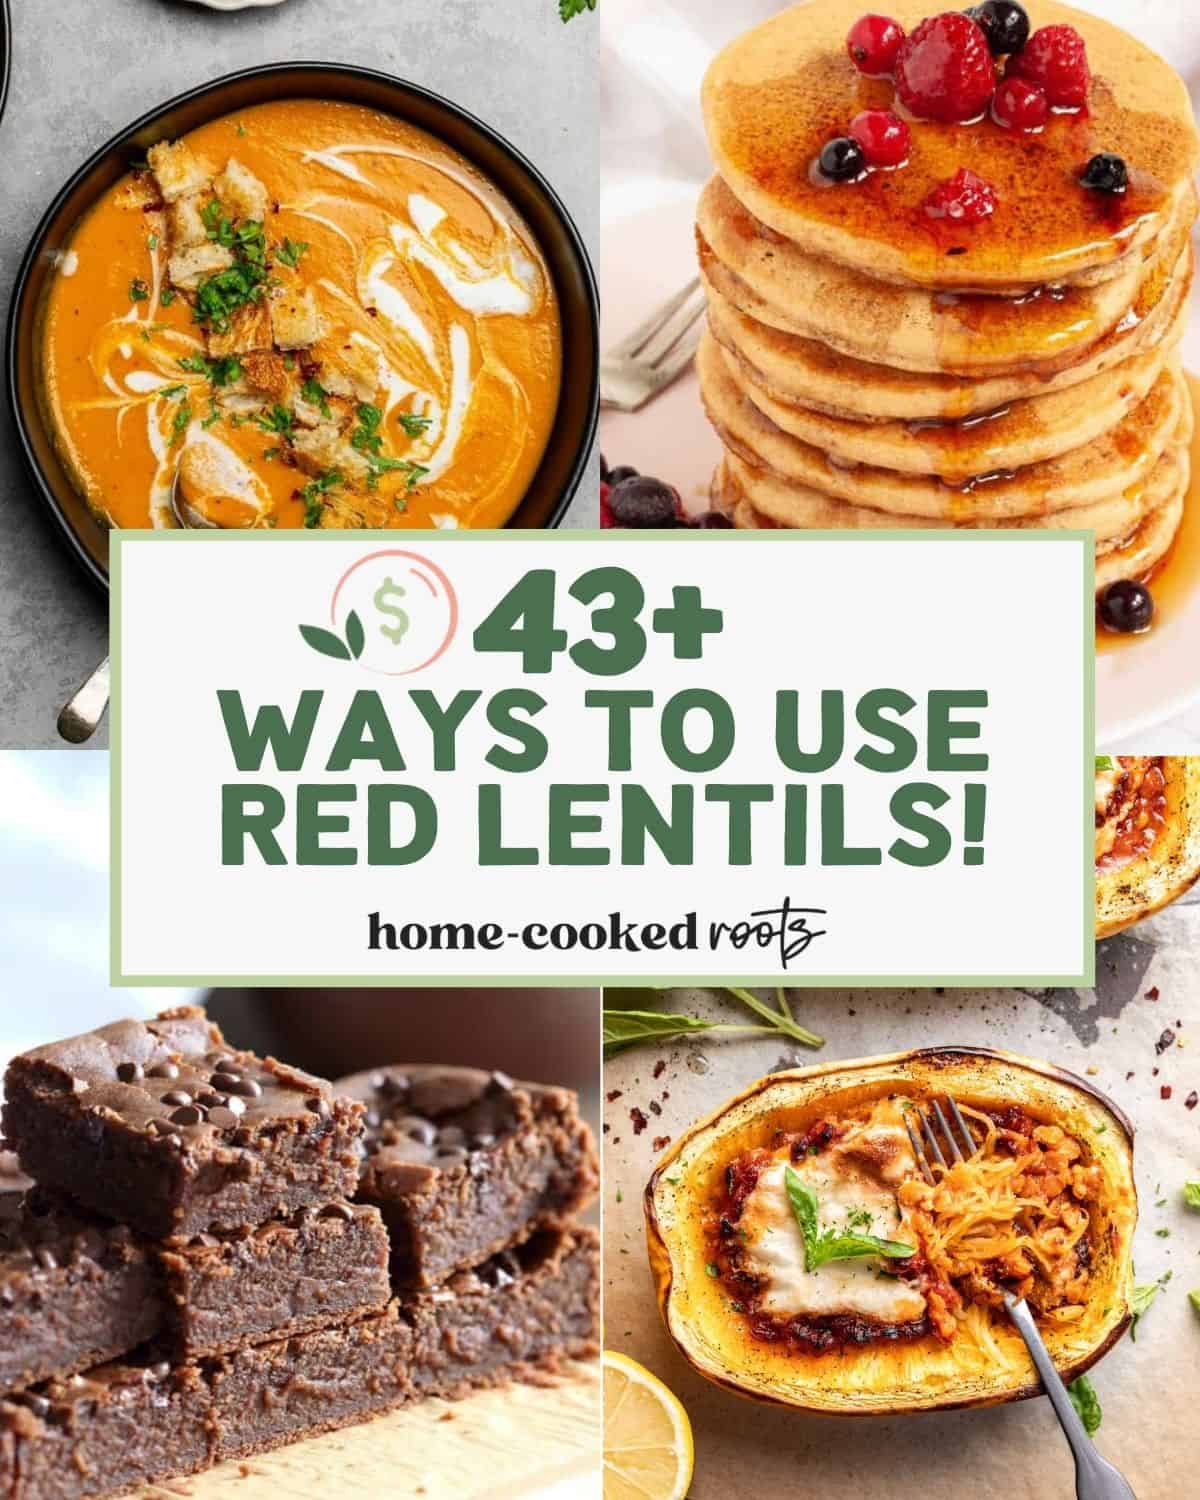 Collage of 4 recipes made with red lentils and overlay text that says 43+ Vegan Ways to Use Red Lentils.